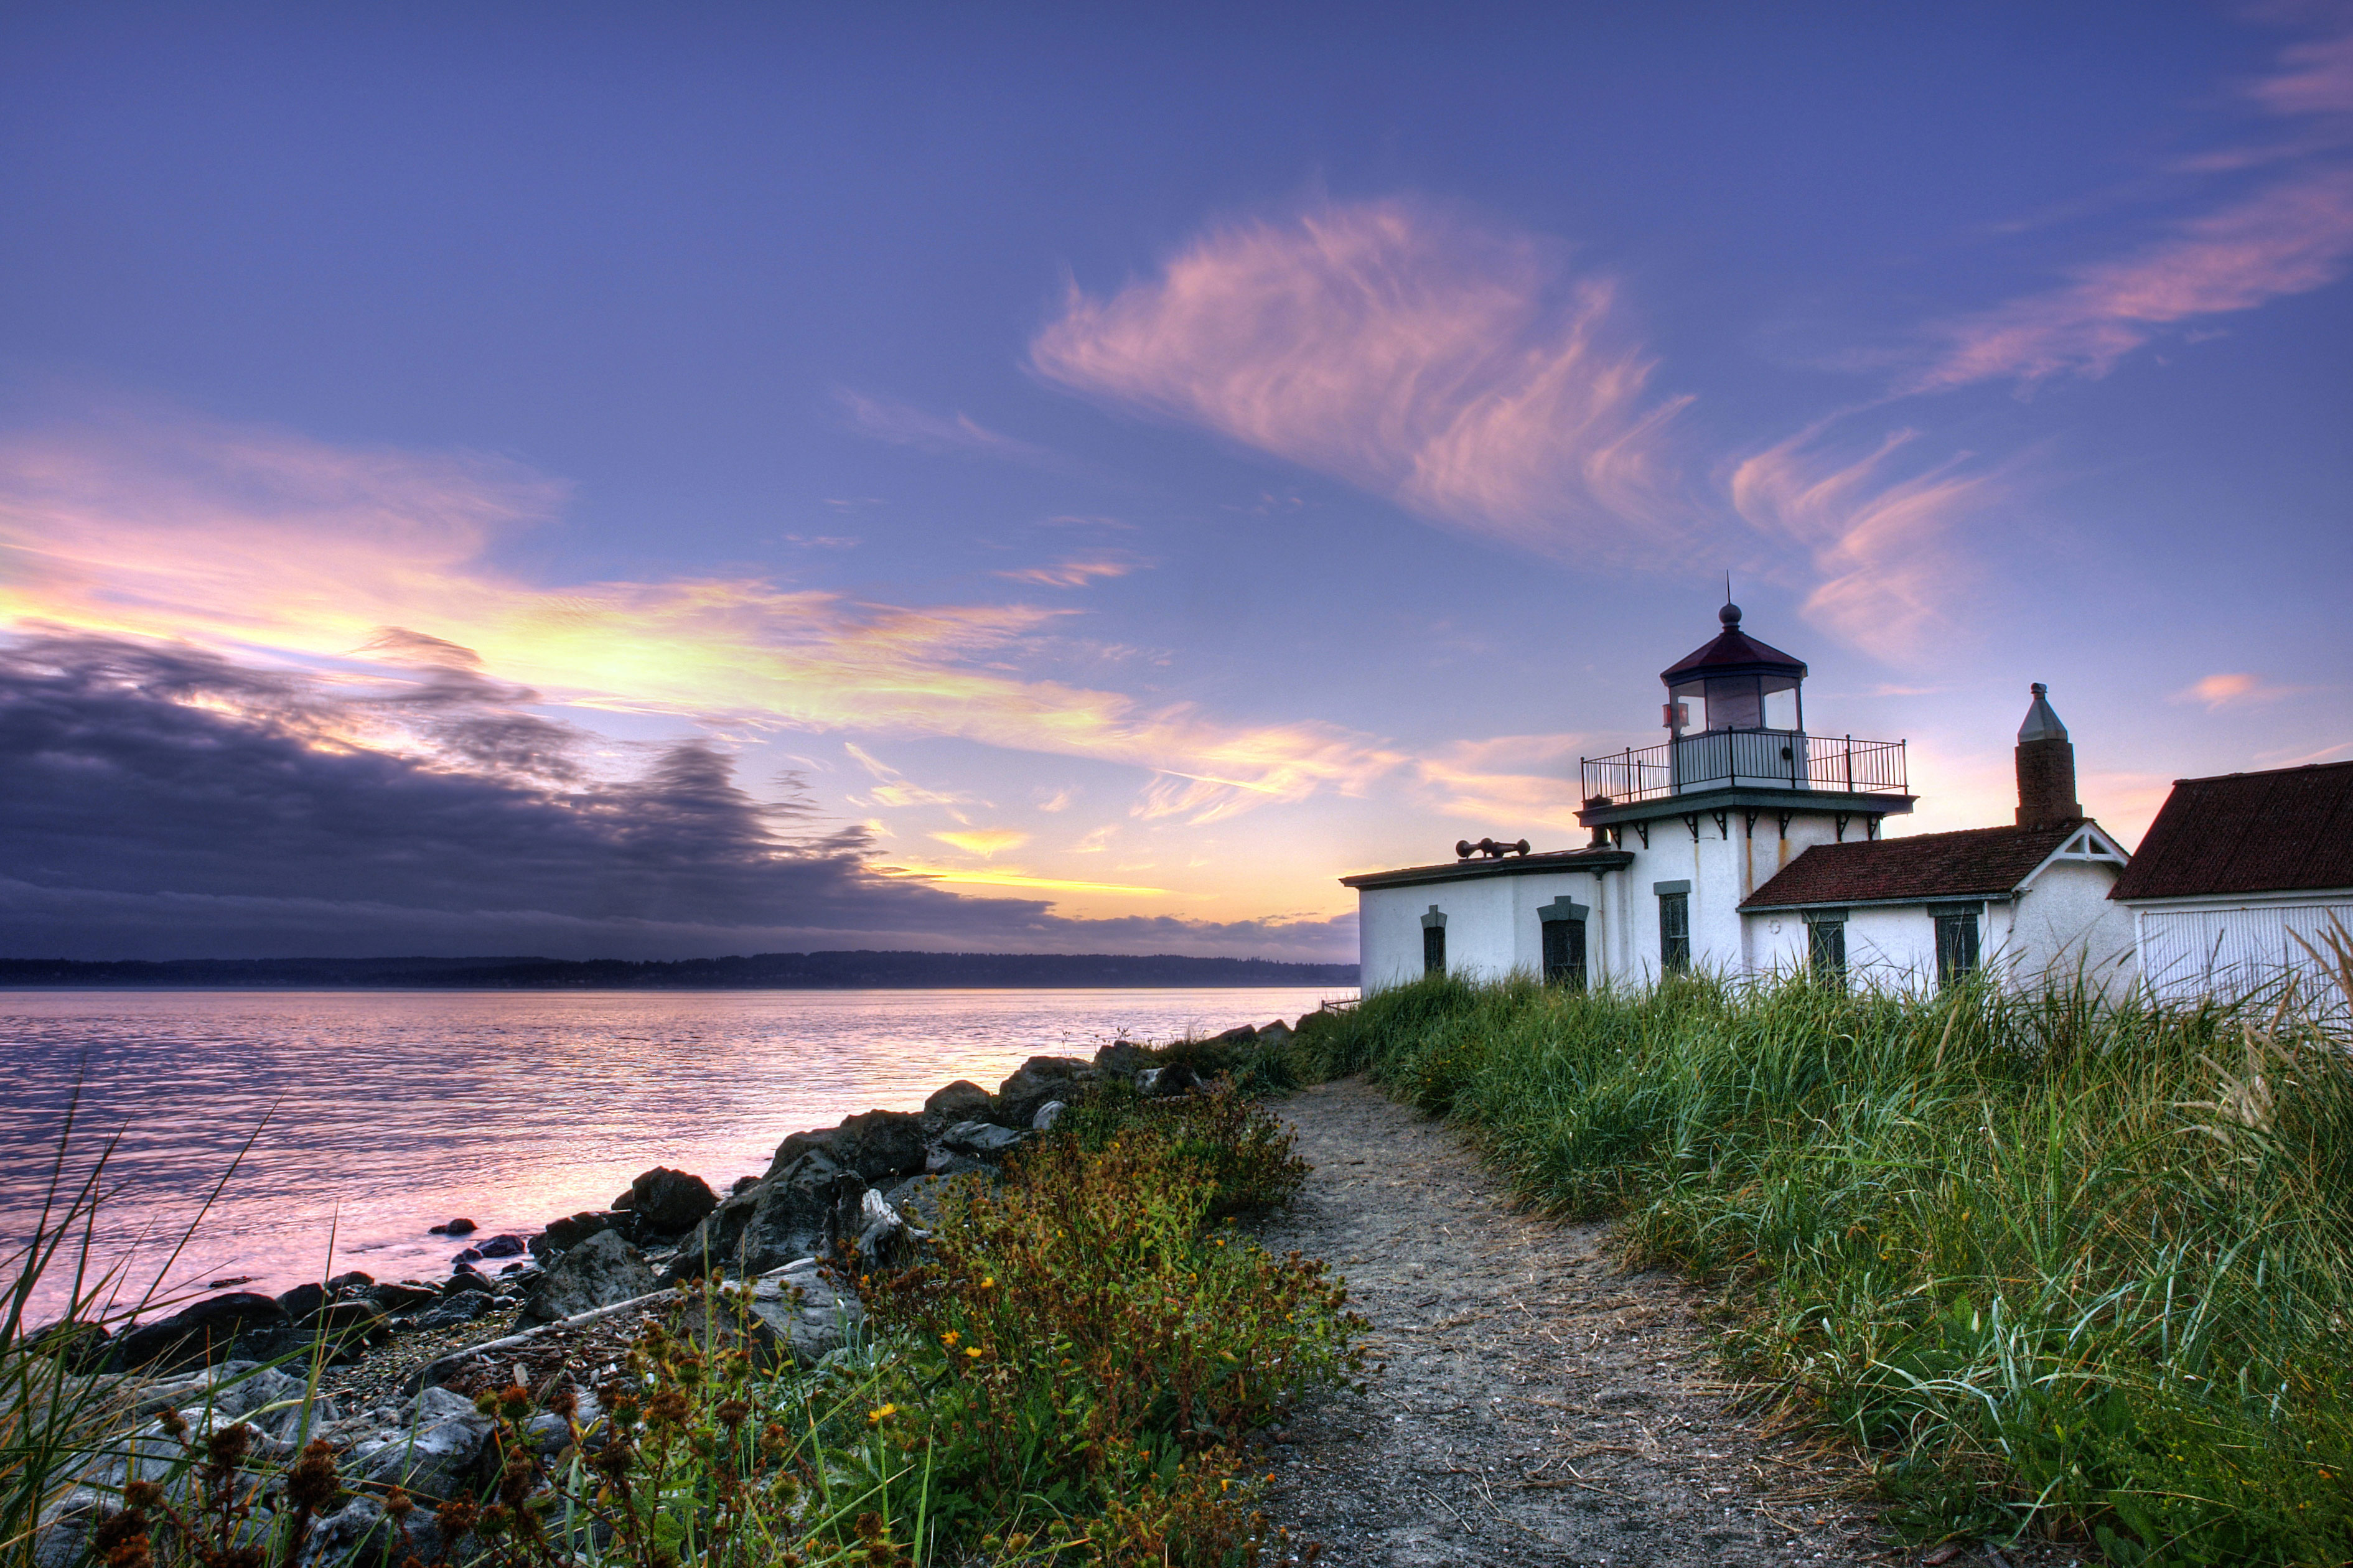 Discovery Park at sunset. Image by David Hogan / Getty